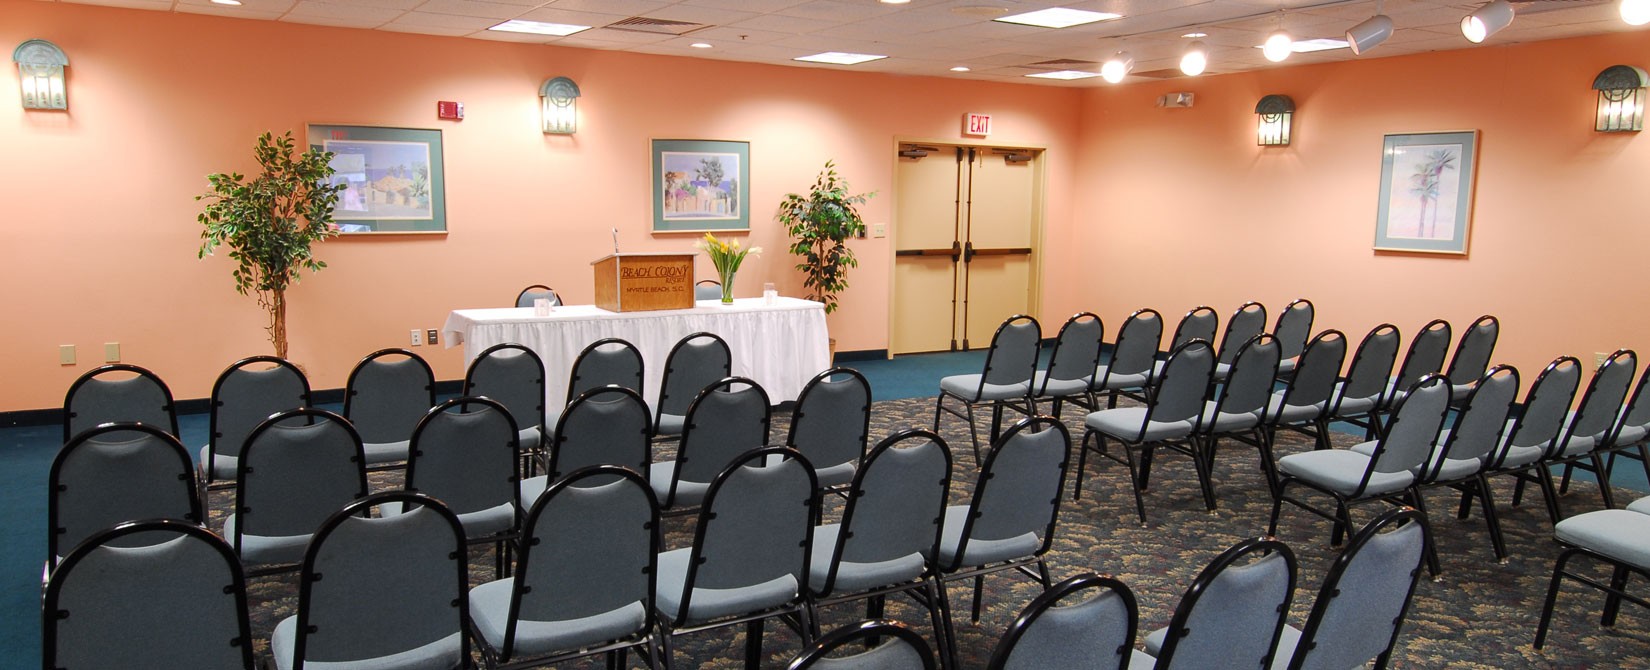 Meeting room with podium and chairs at Beach Colony Resort